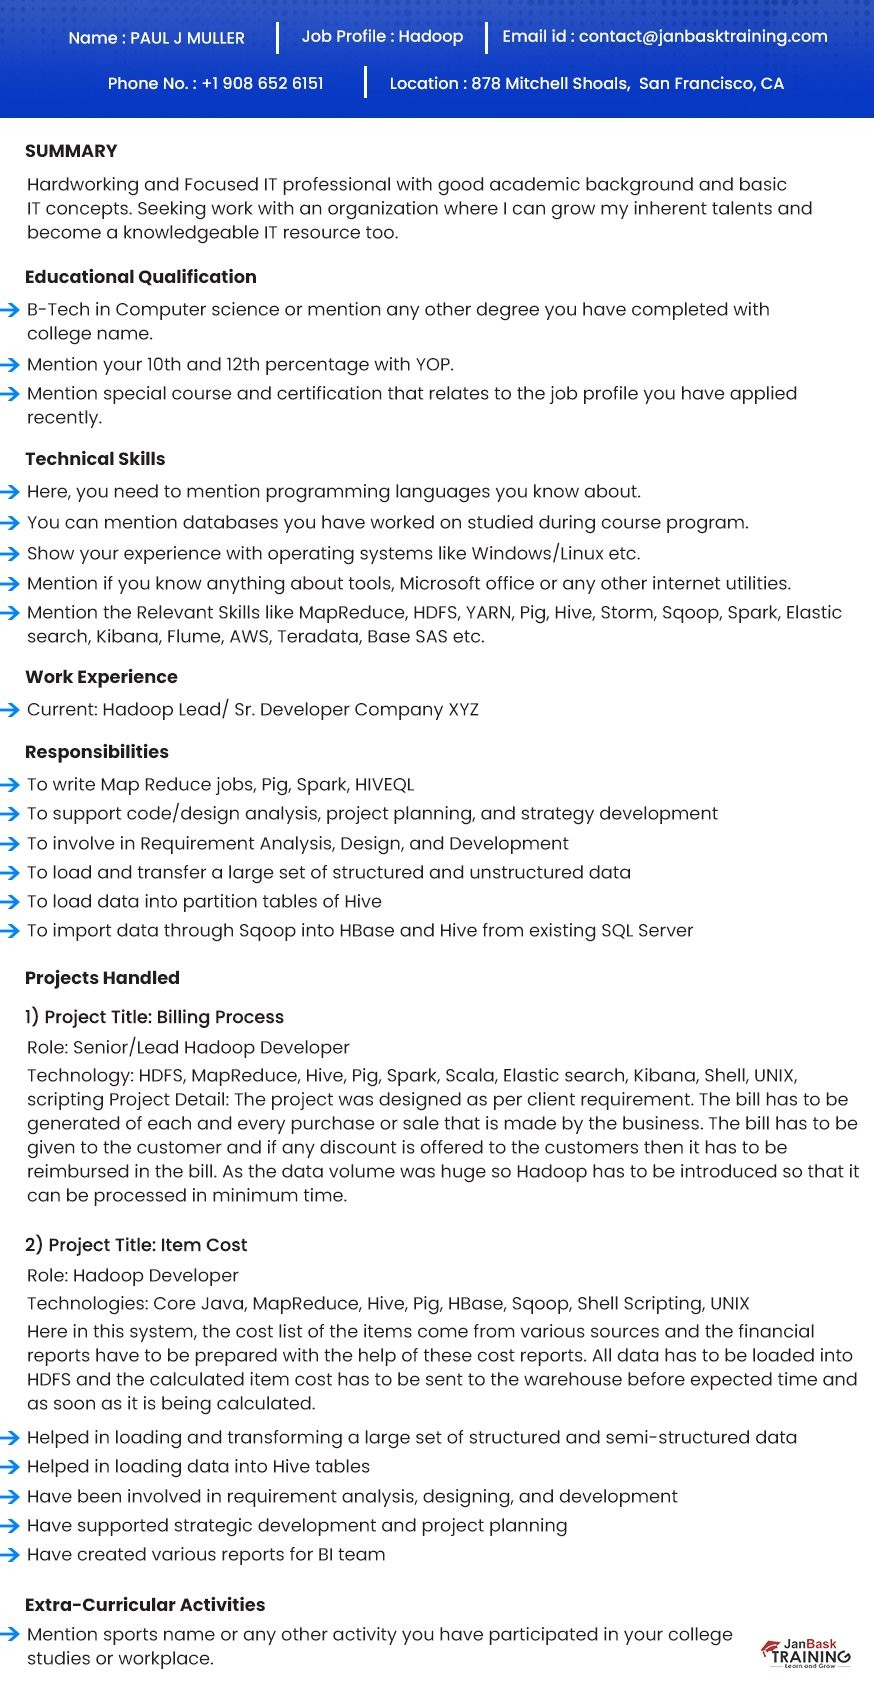 Business Analyst with Hadoop Experince Sample Resume Chief Elements Of A Professional Hadoop Resume In 2022